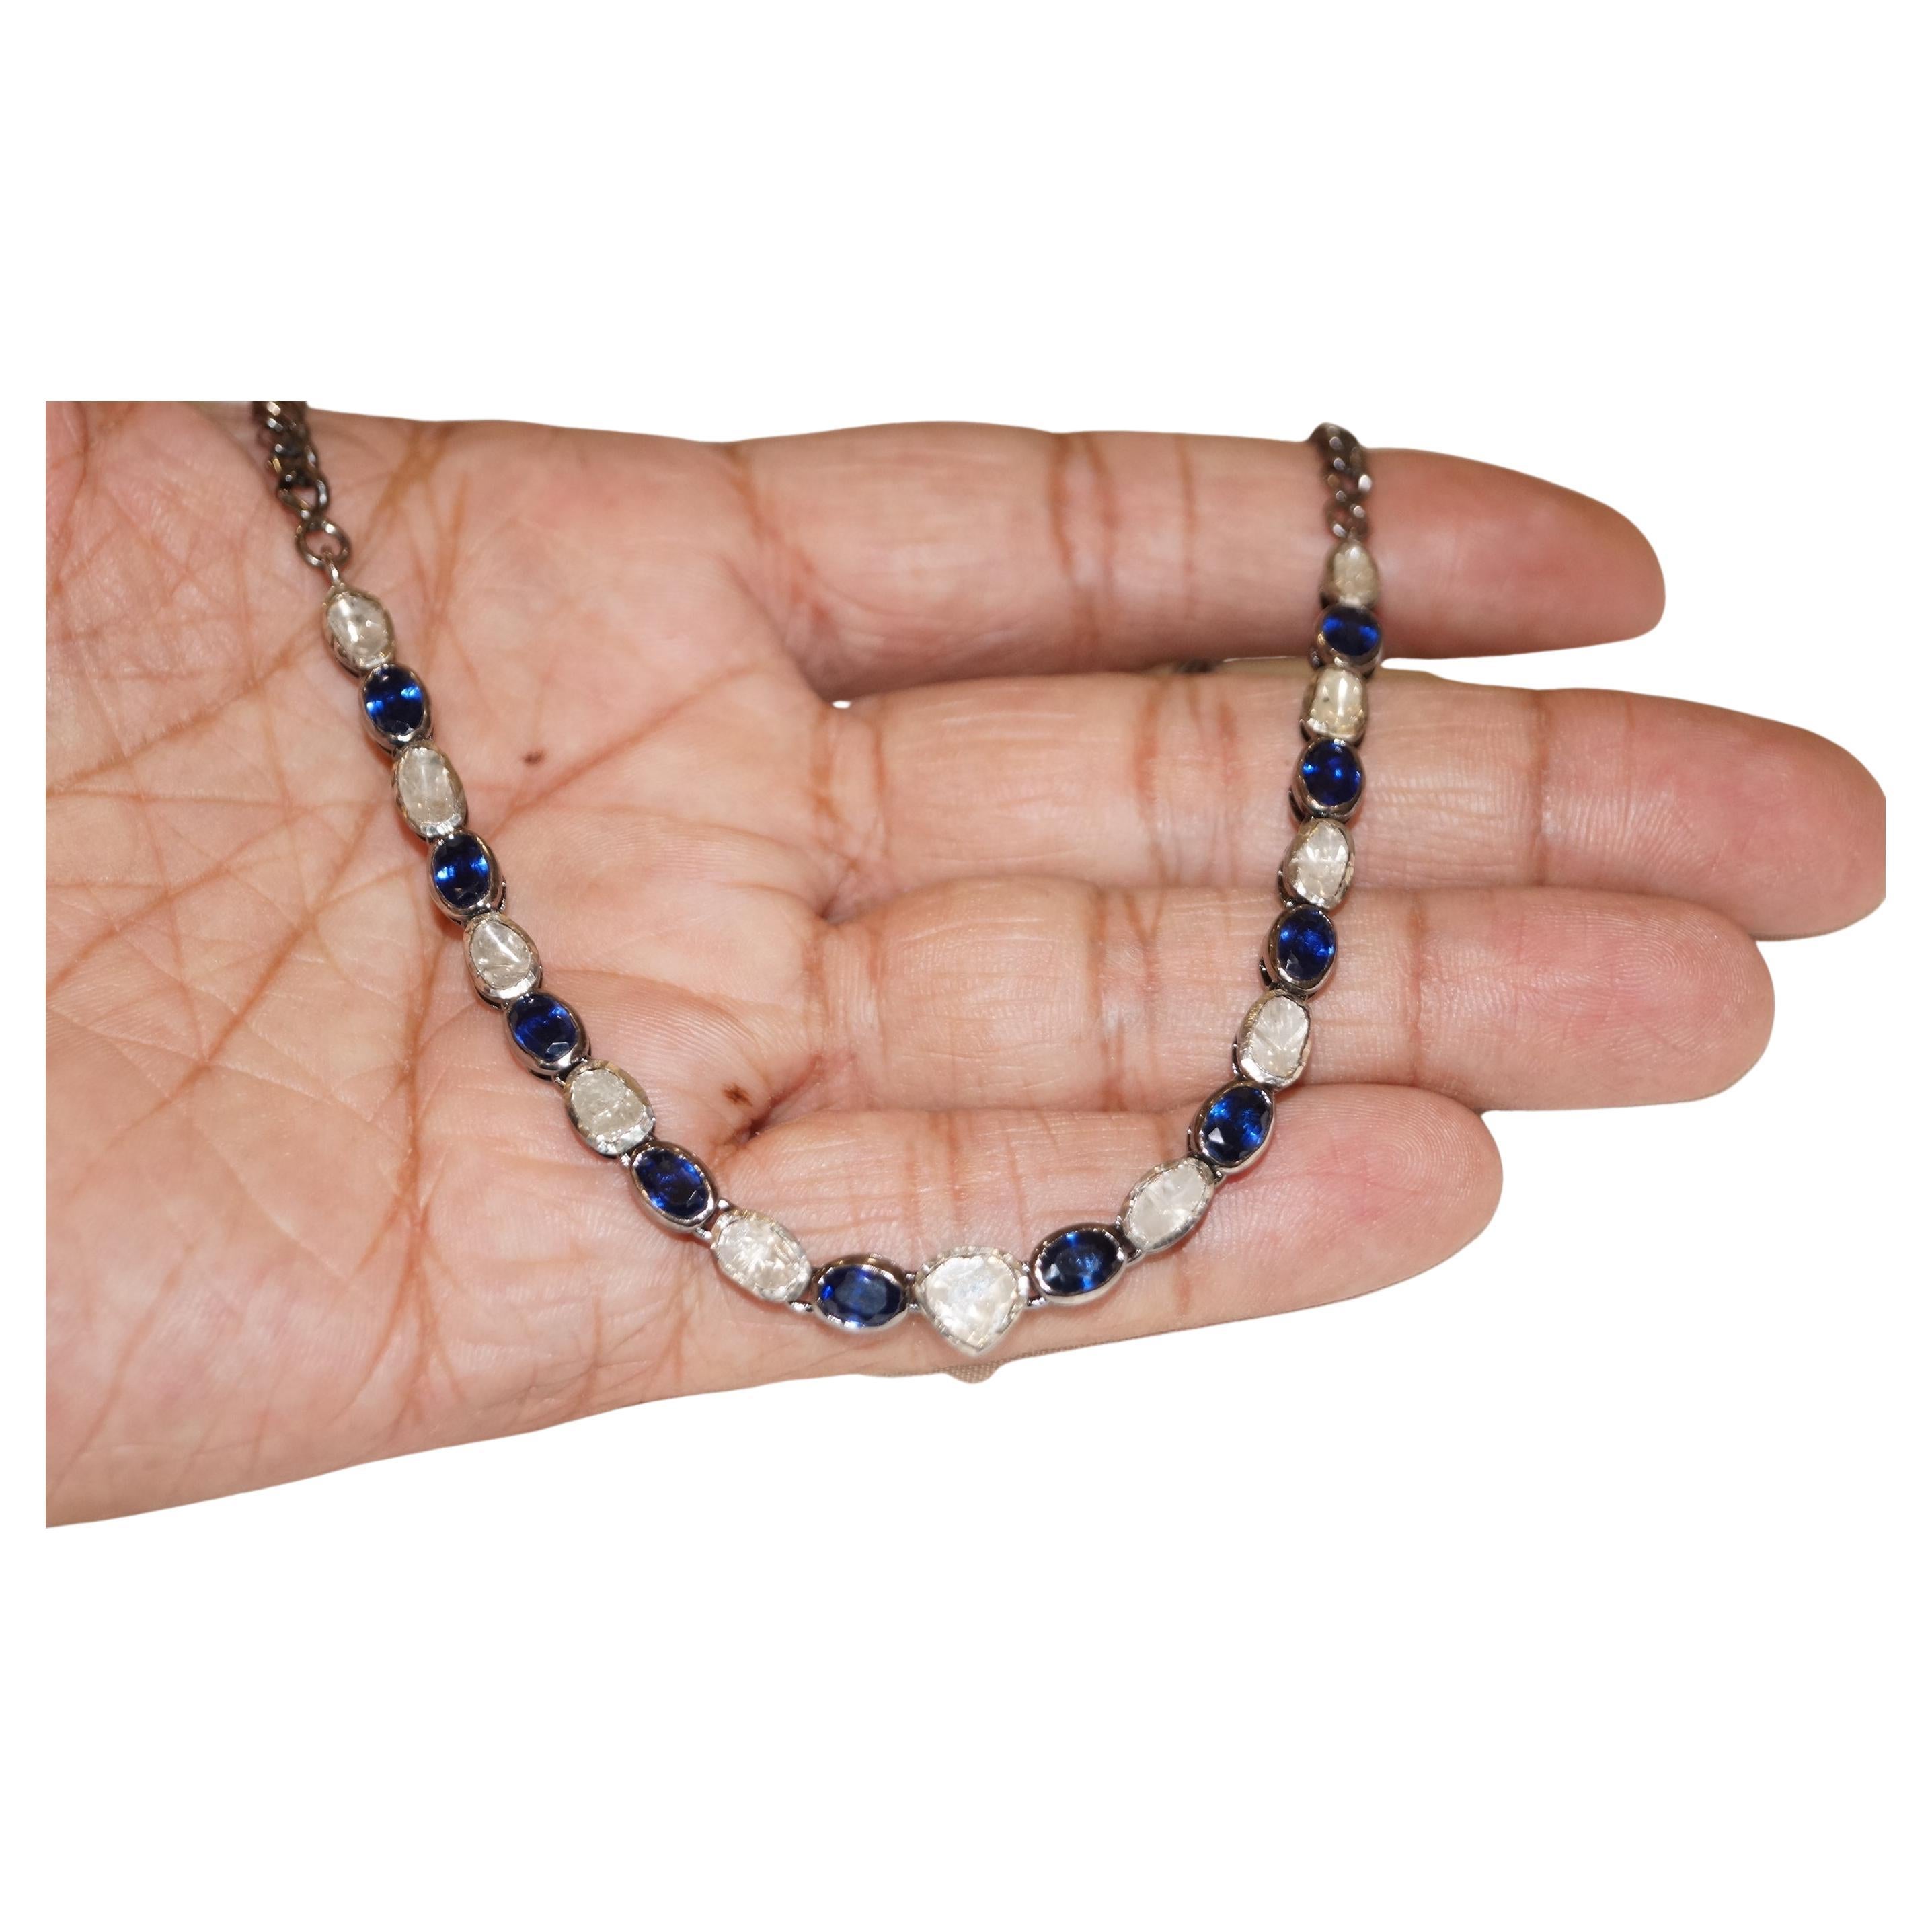 This beautiful diamond choker is handcrafted with sparling diamonds and blue sapphires. Its elegant style and charm enhances the aura and beauty of the bride.
This necklace has finely chosen natural uncut diamonds. Natural Blue sapphire that are set